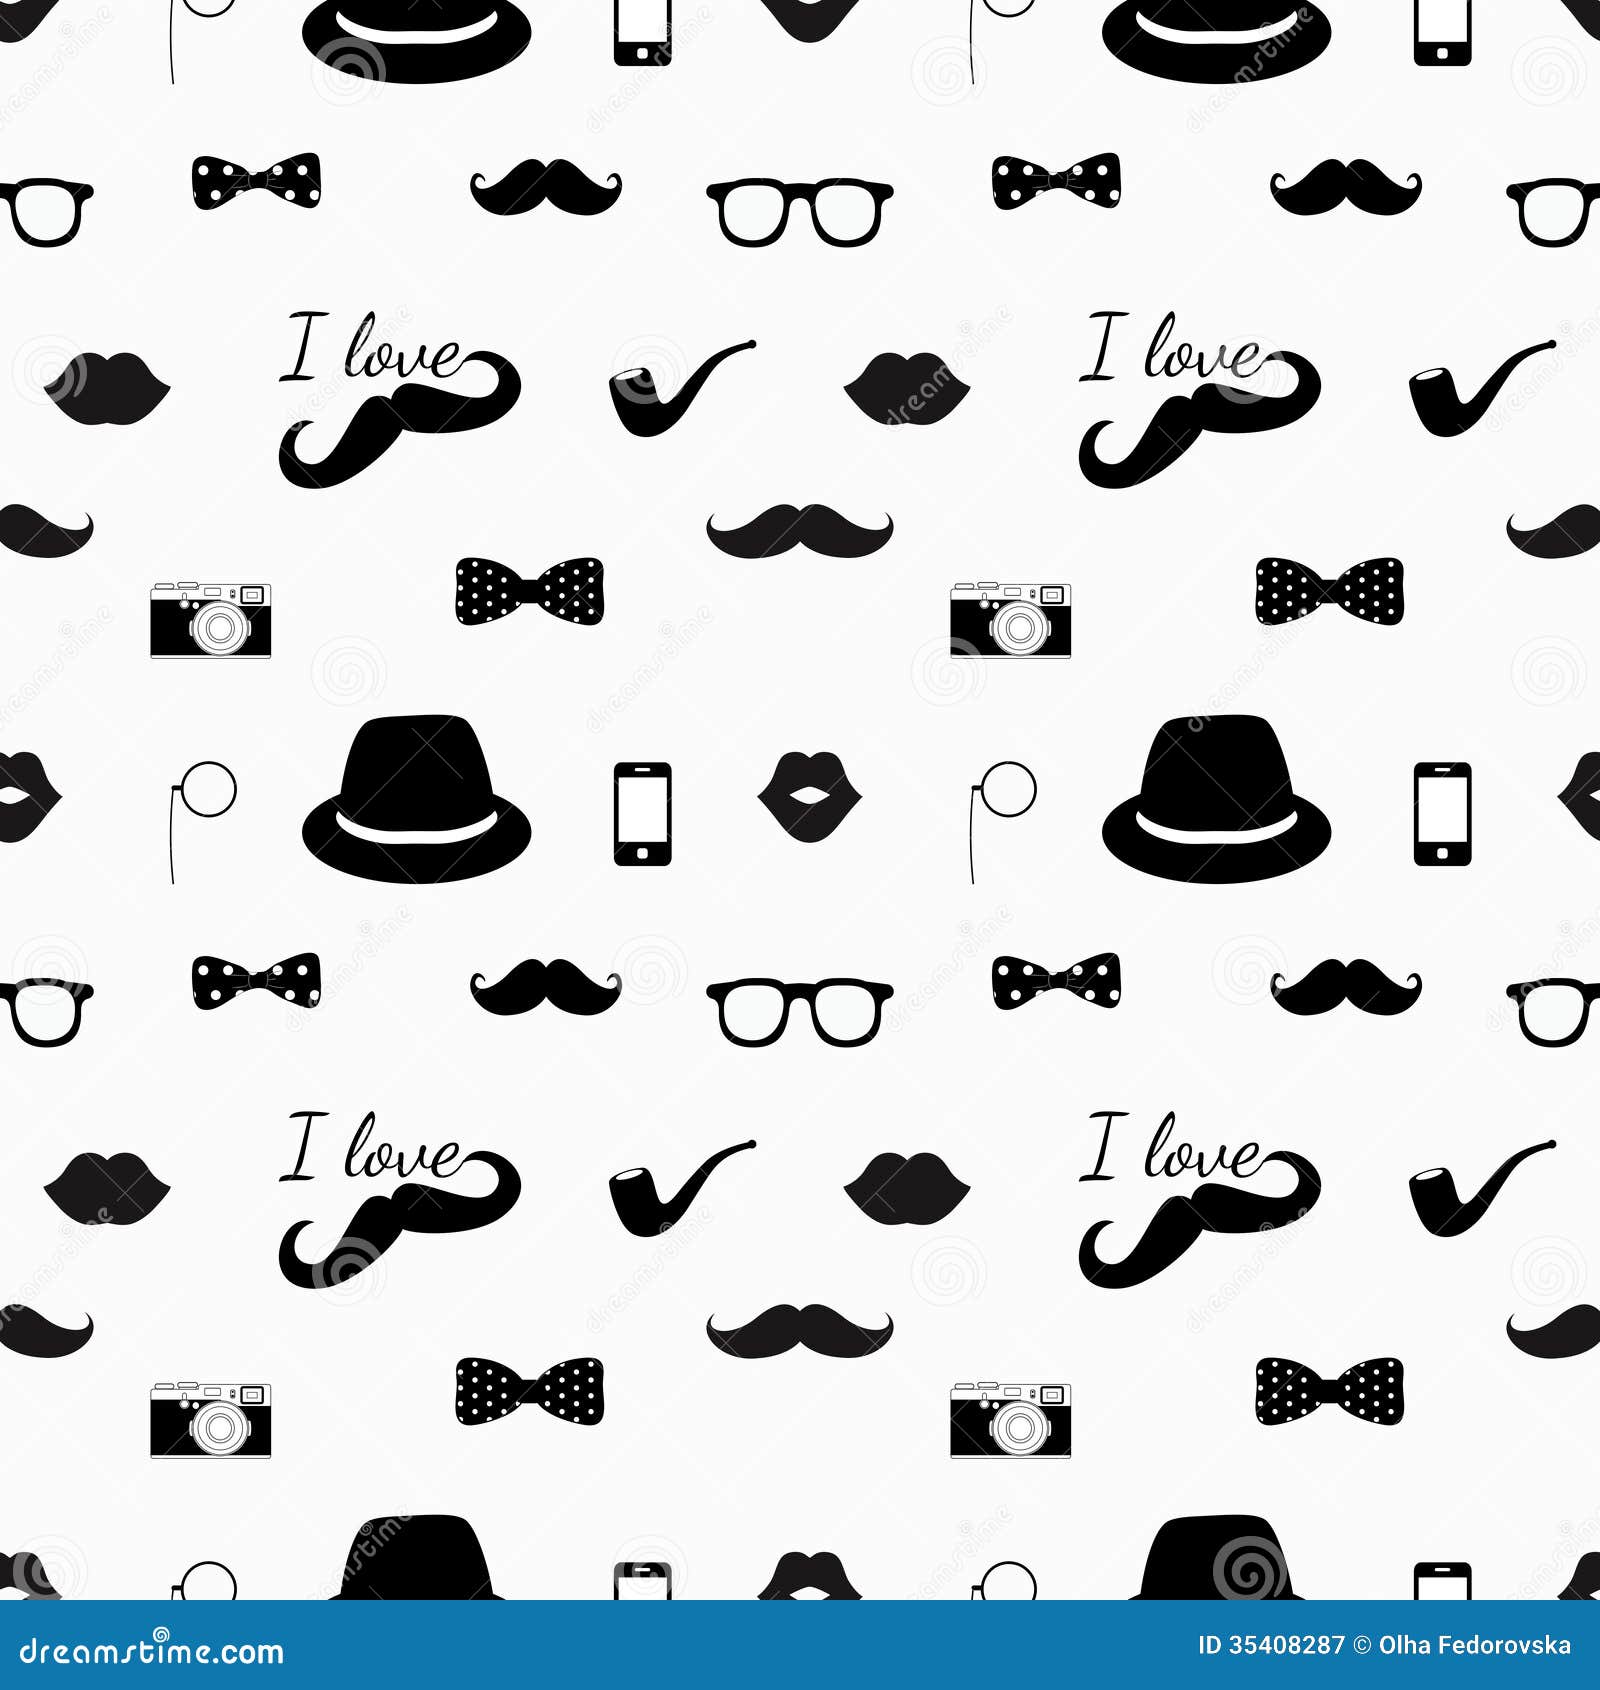  Hipster  Black  And White  Seamless Pattern  Stock Vector 